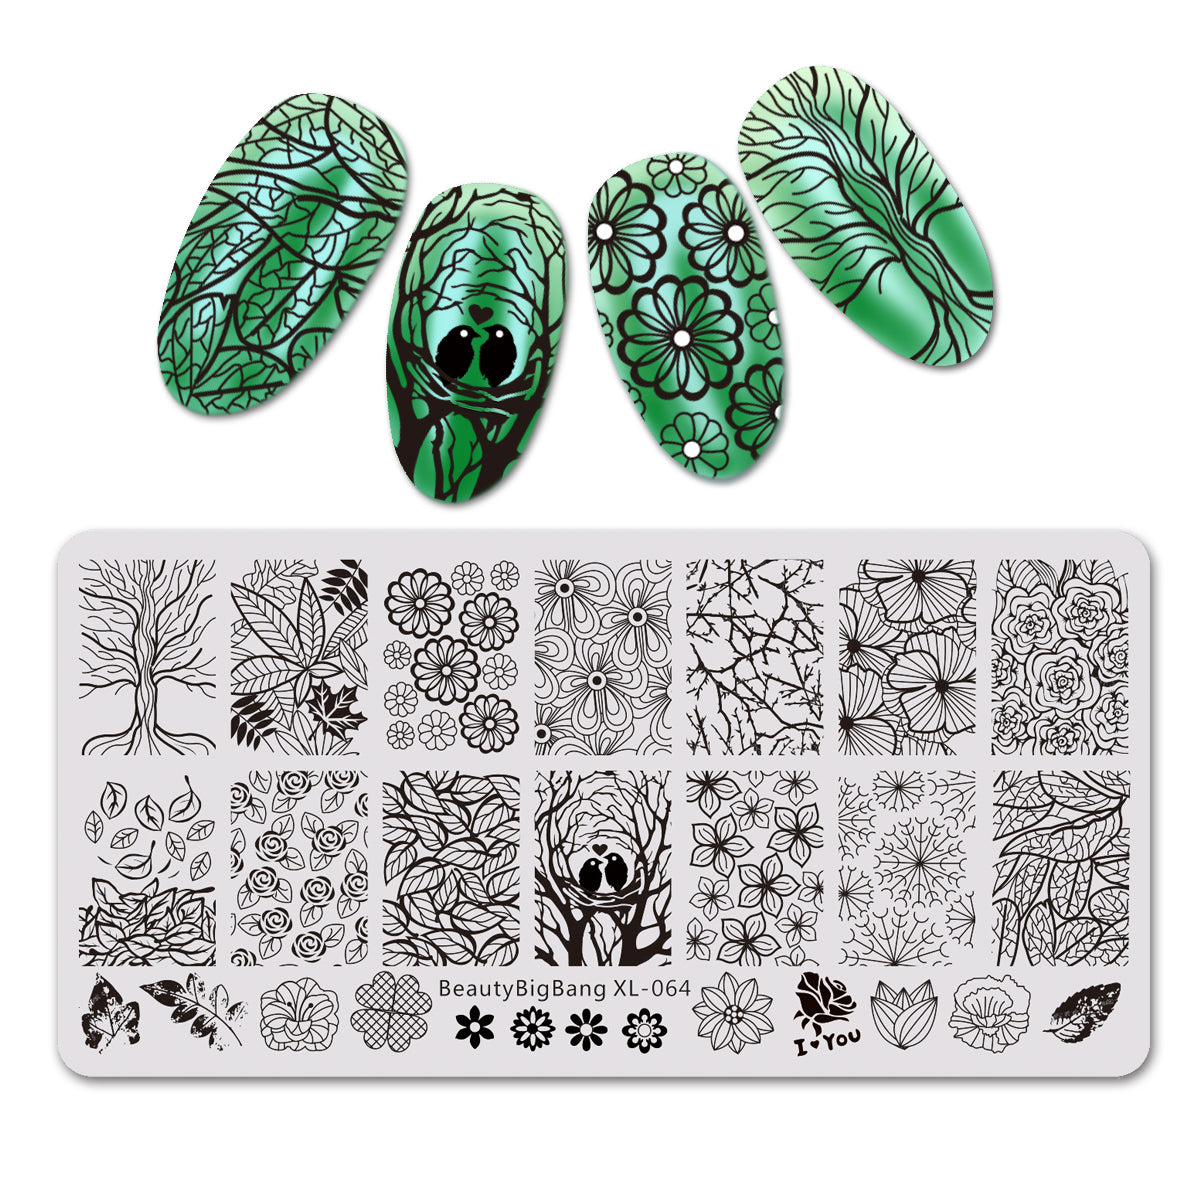 BEAUTYBIGBANG 4Pcs Nail Stamping Plate Veins Theme - Marble Leaves